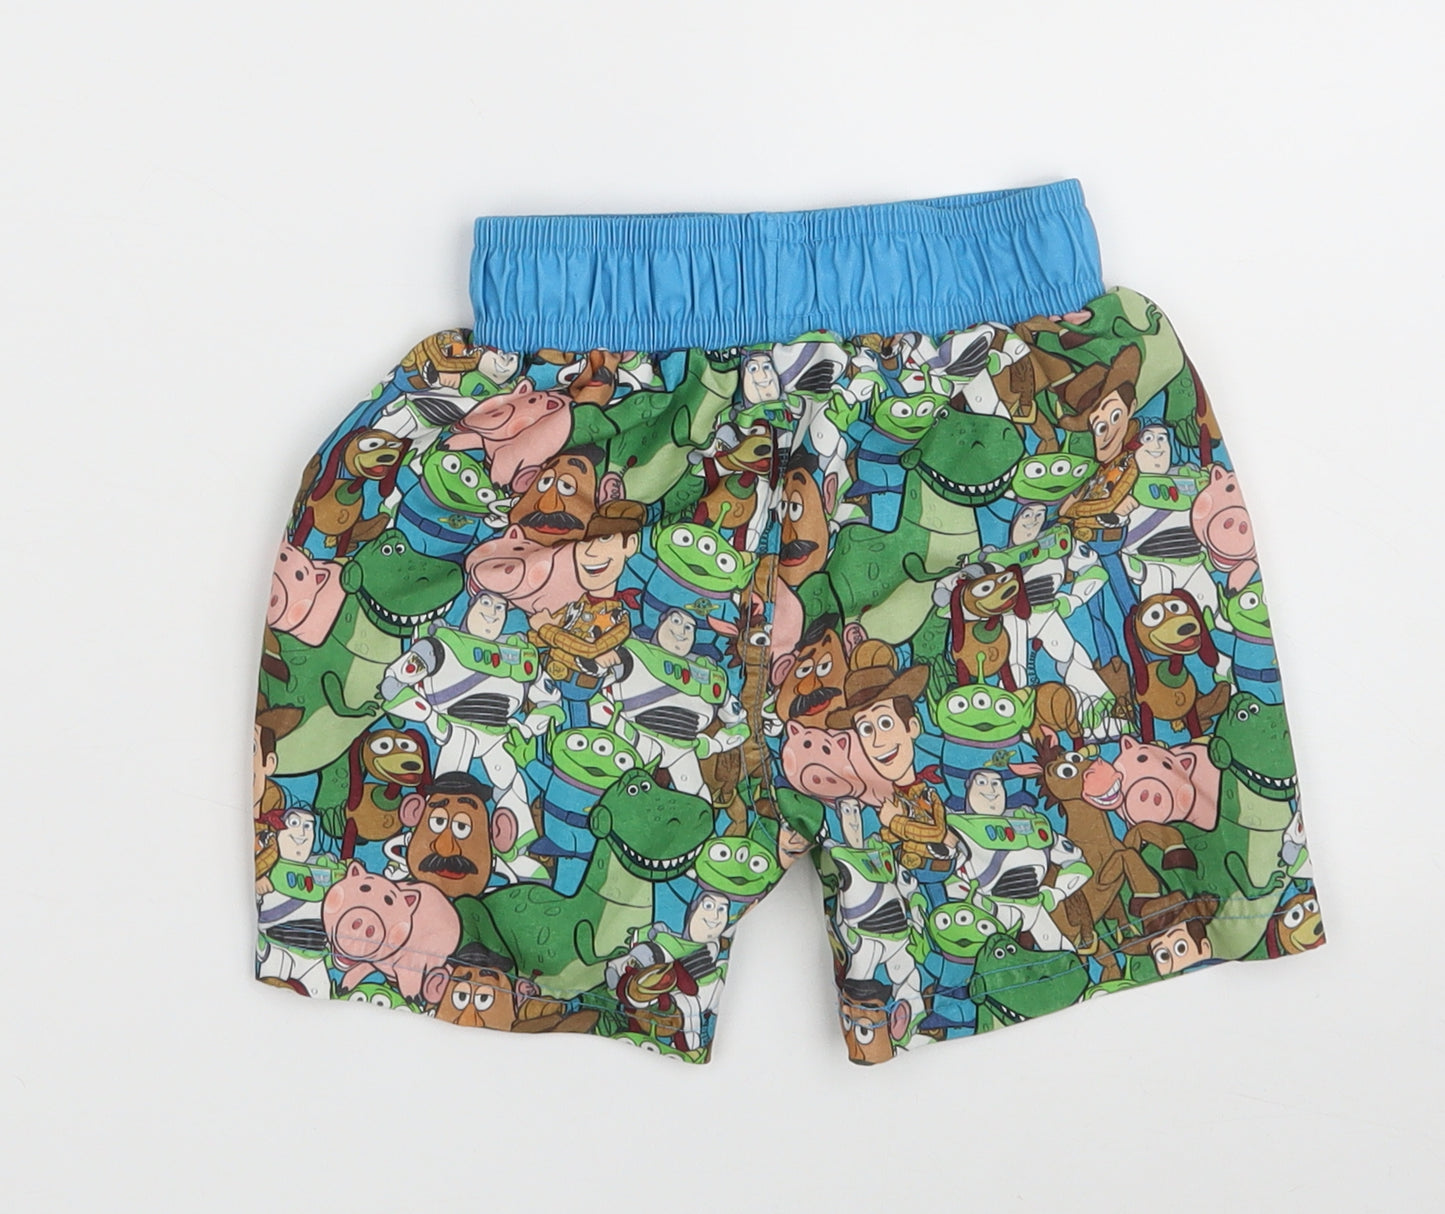 Primark Boys Multicoloured  100% Polyester Sweat Shorts Size 2-3 Years  Regular  - Toy story